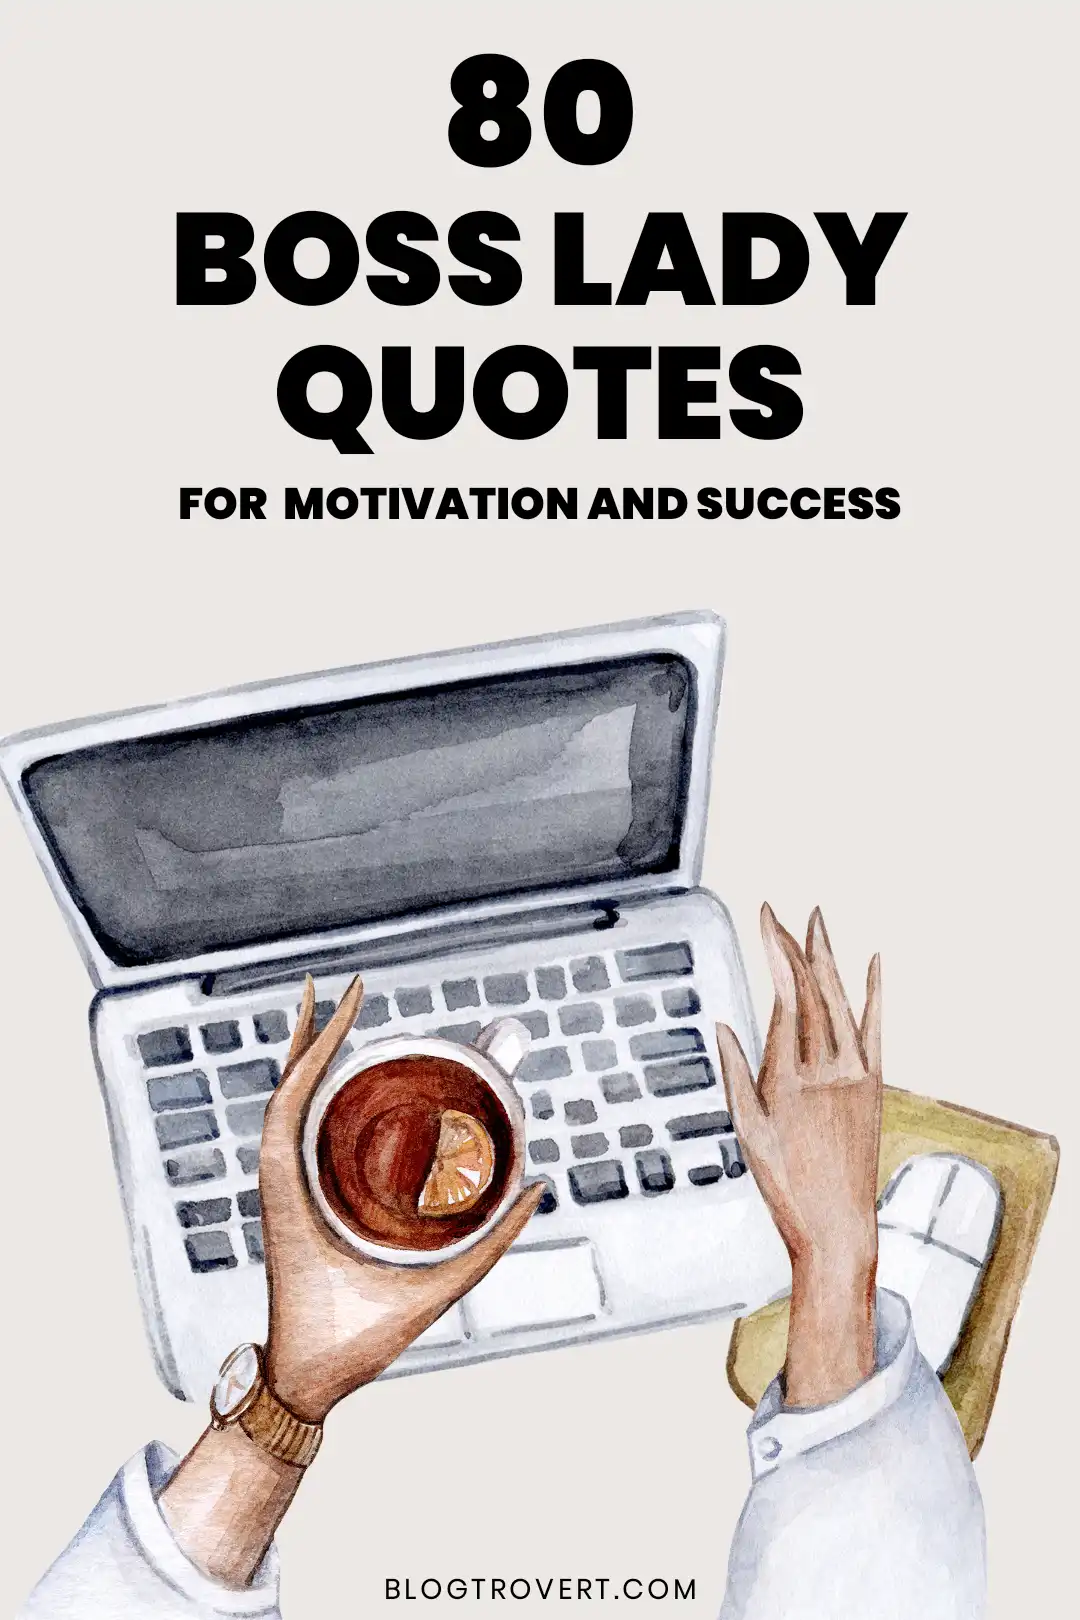 106 boss lady quotes for motivation, success and more 2